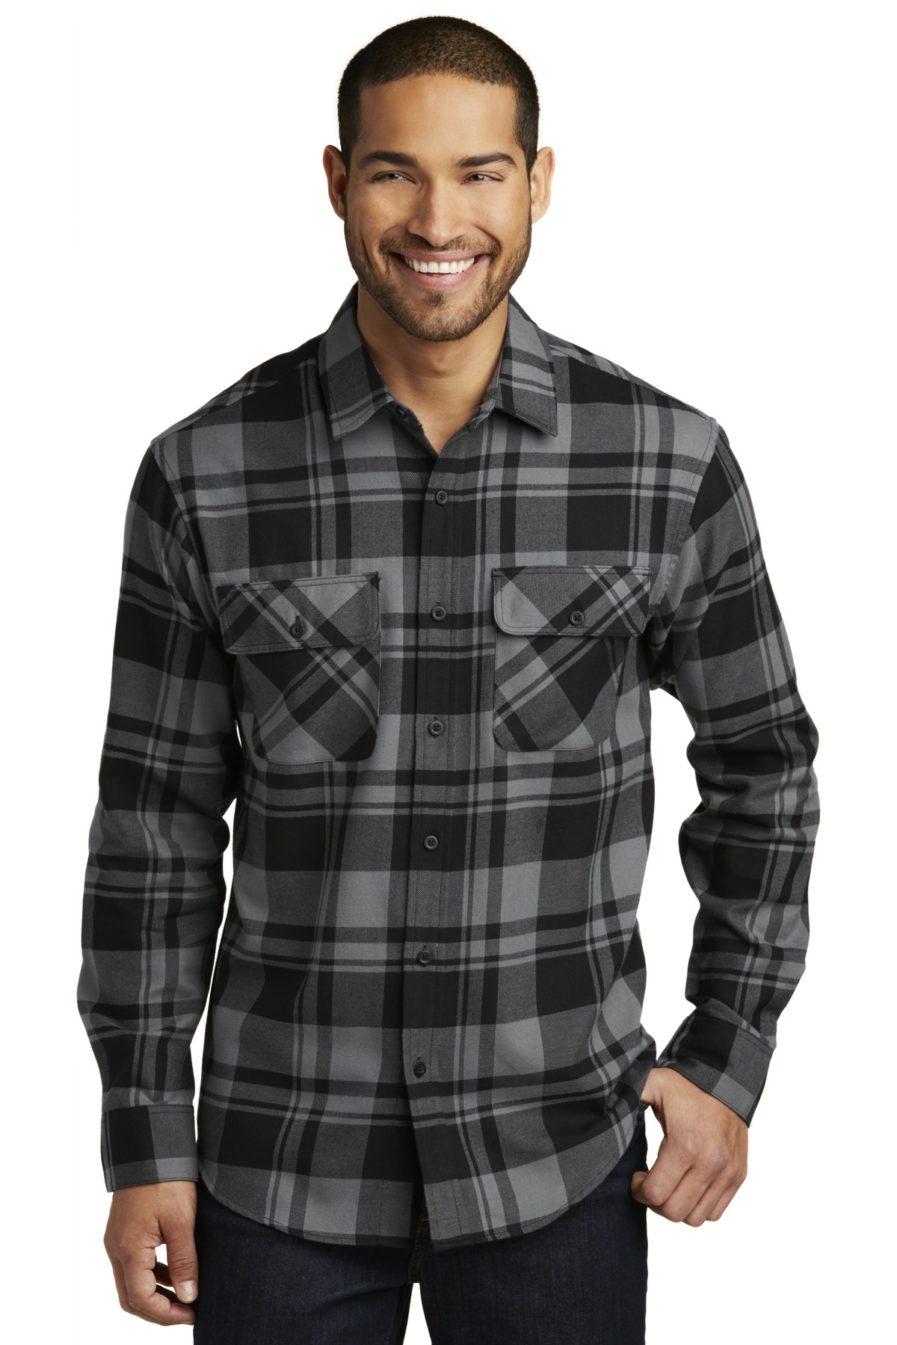 Man with a black and grey flannel